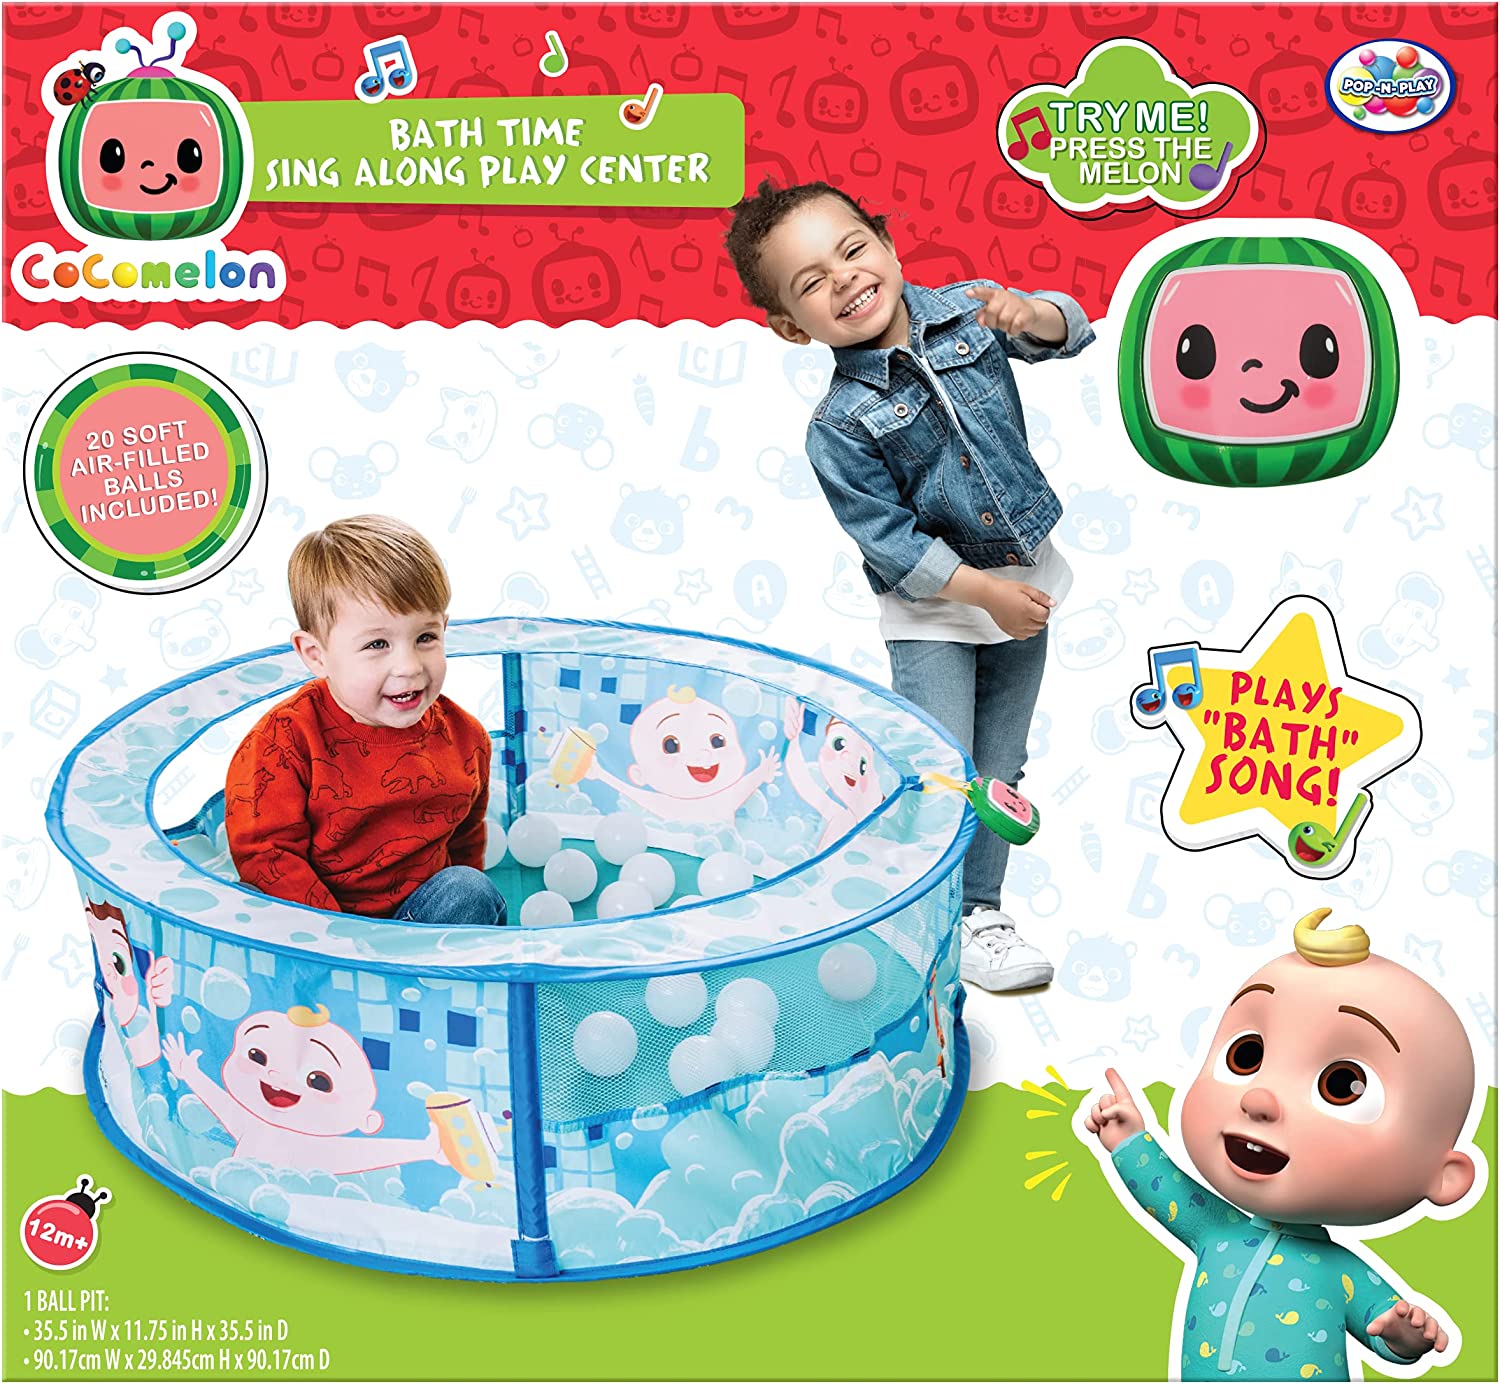 CoComelon Bath Time Sing Along Musical Ball Pit w/ 20 Play Balls $9 + Free Shipping w/ Prime or on $25+